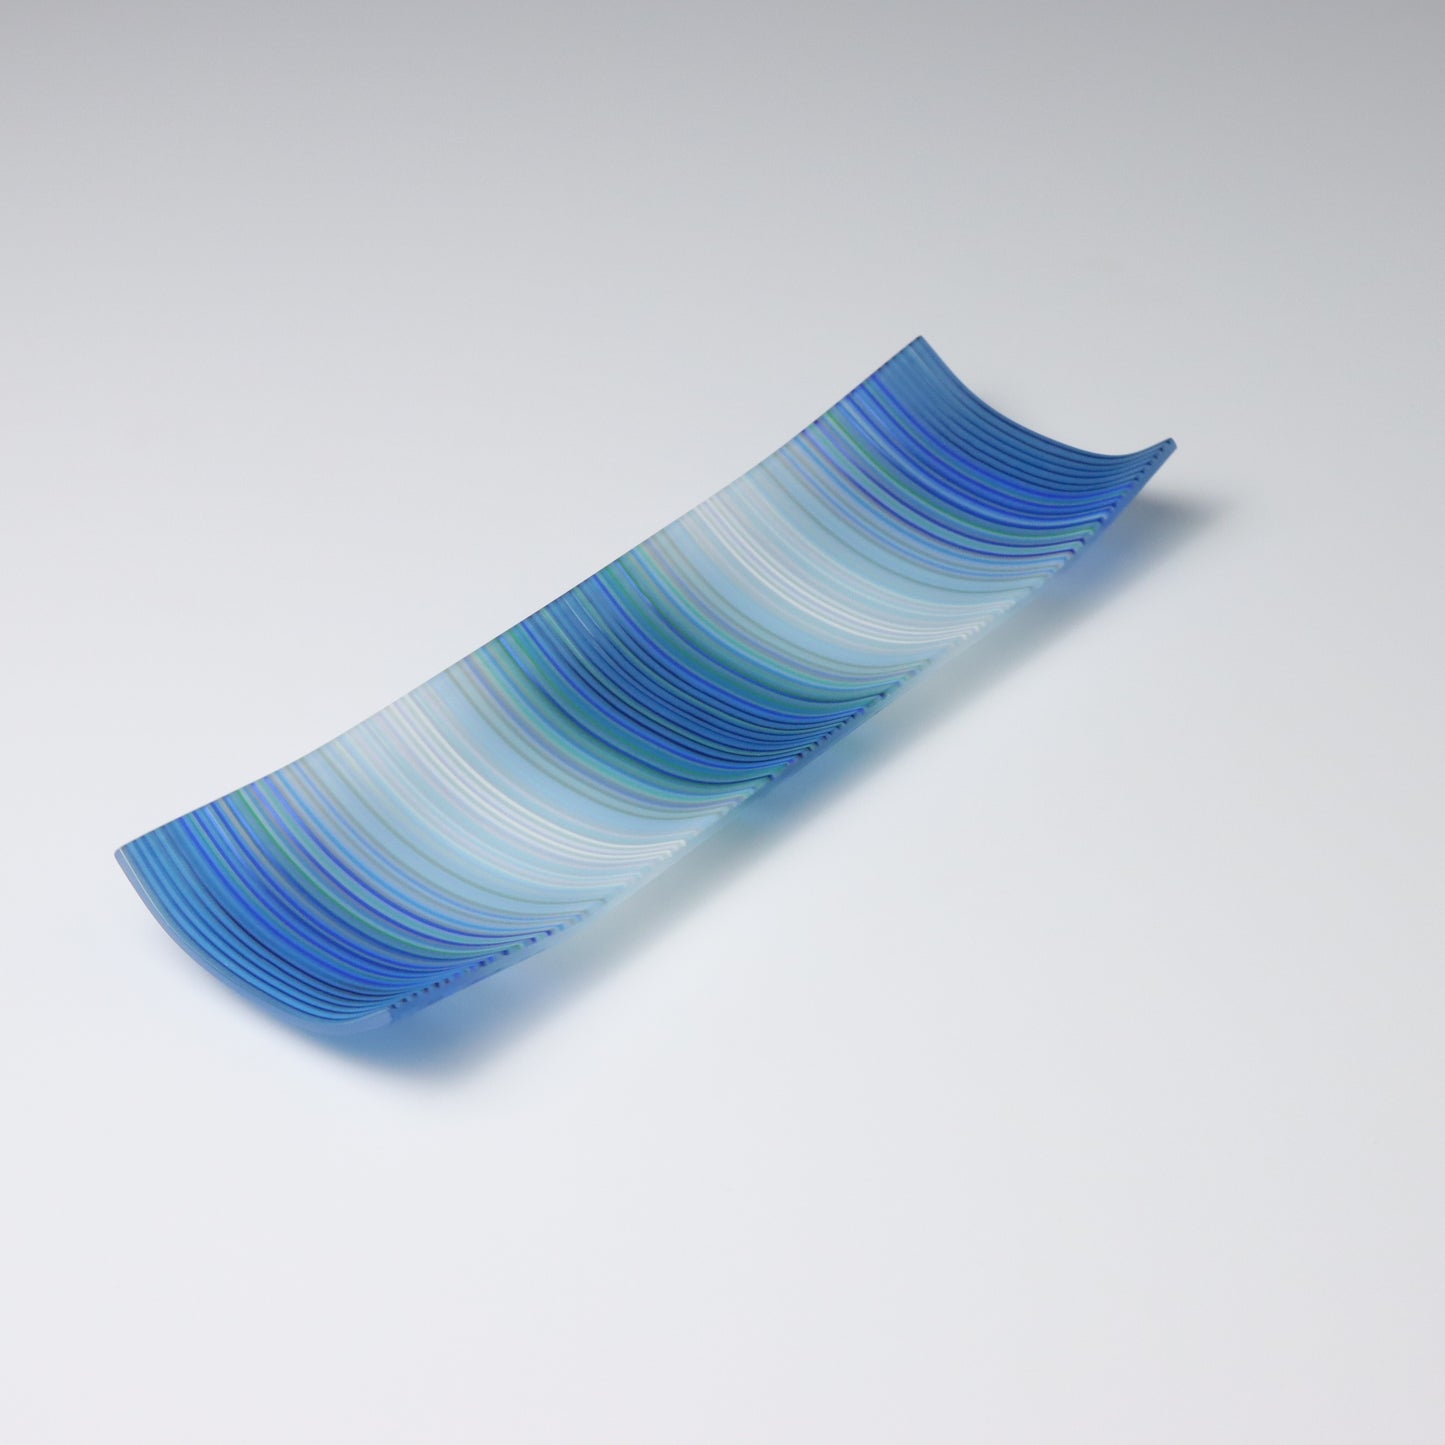 S127 | Rectangular Shaped ColourWave Glass Plate | Dark Blues and White